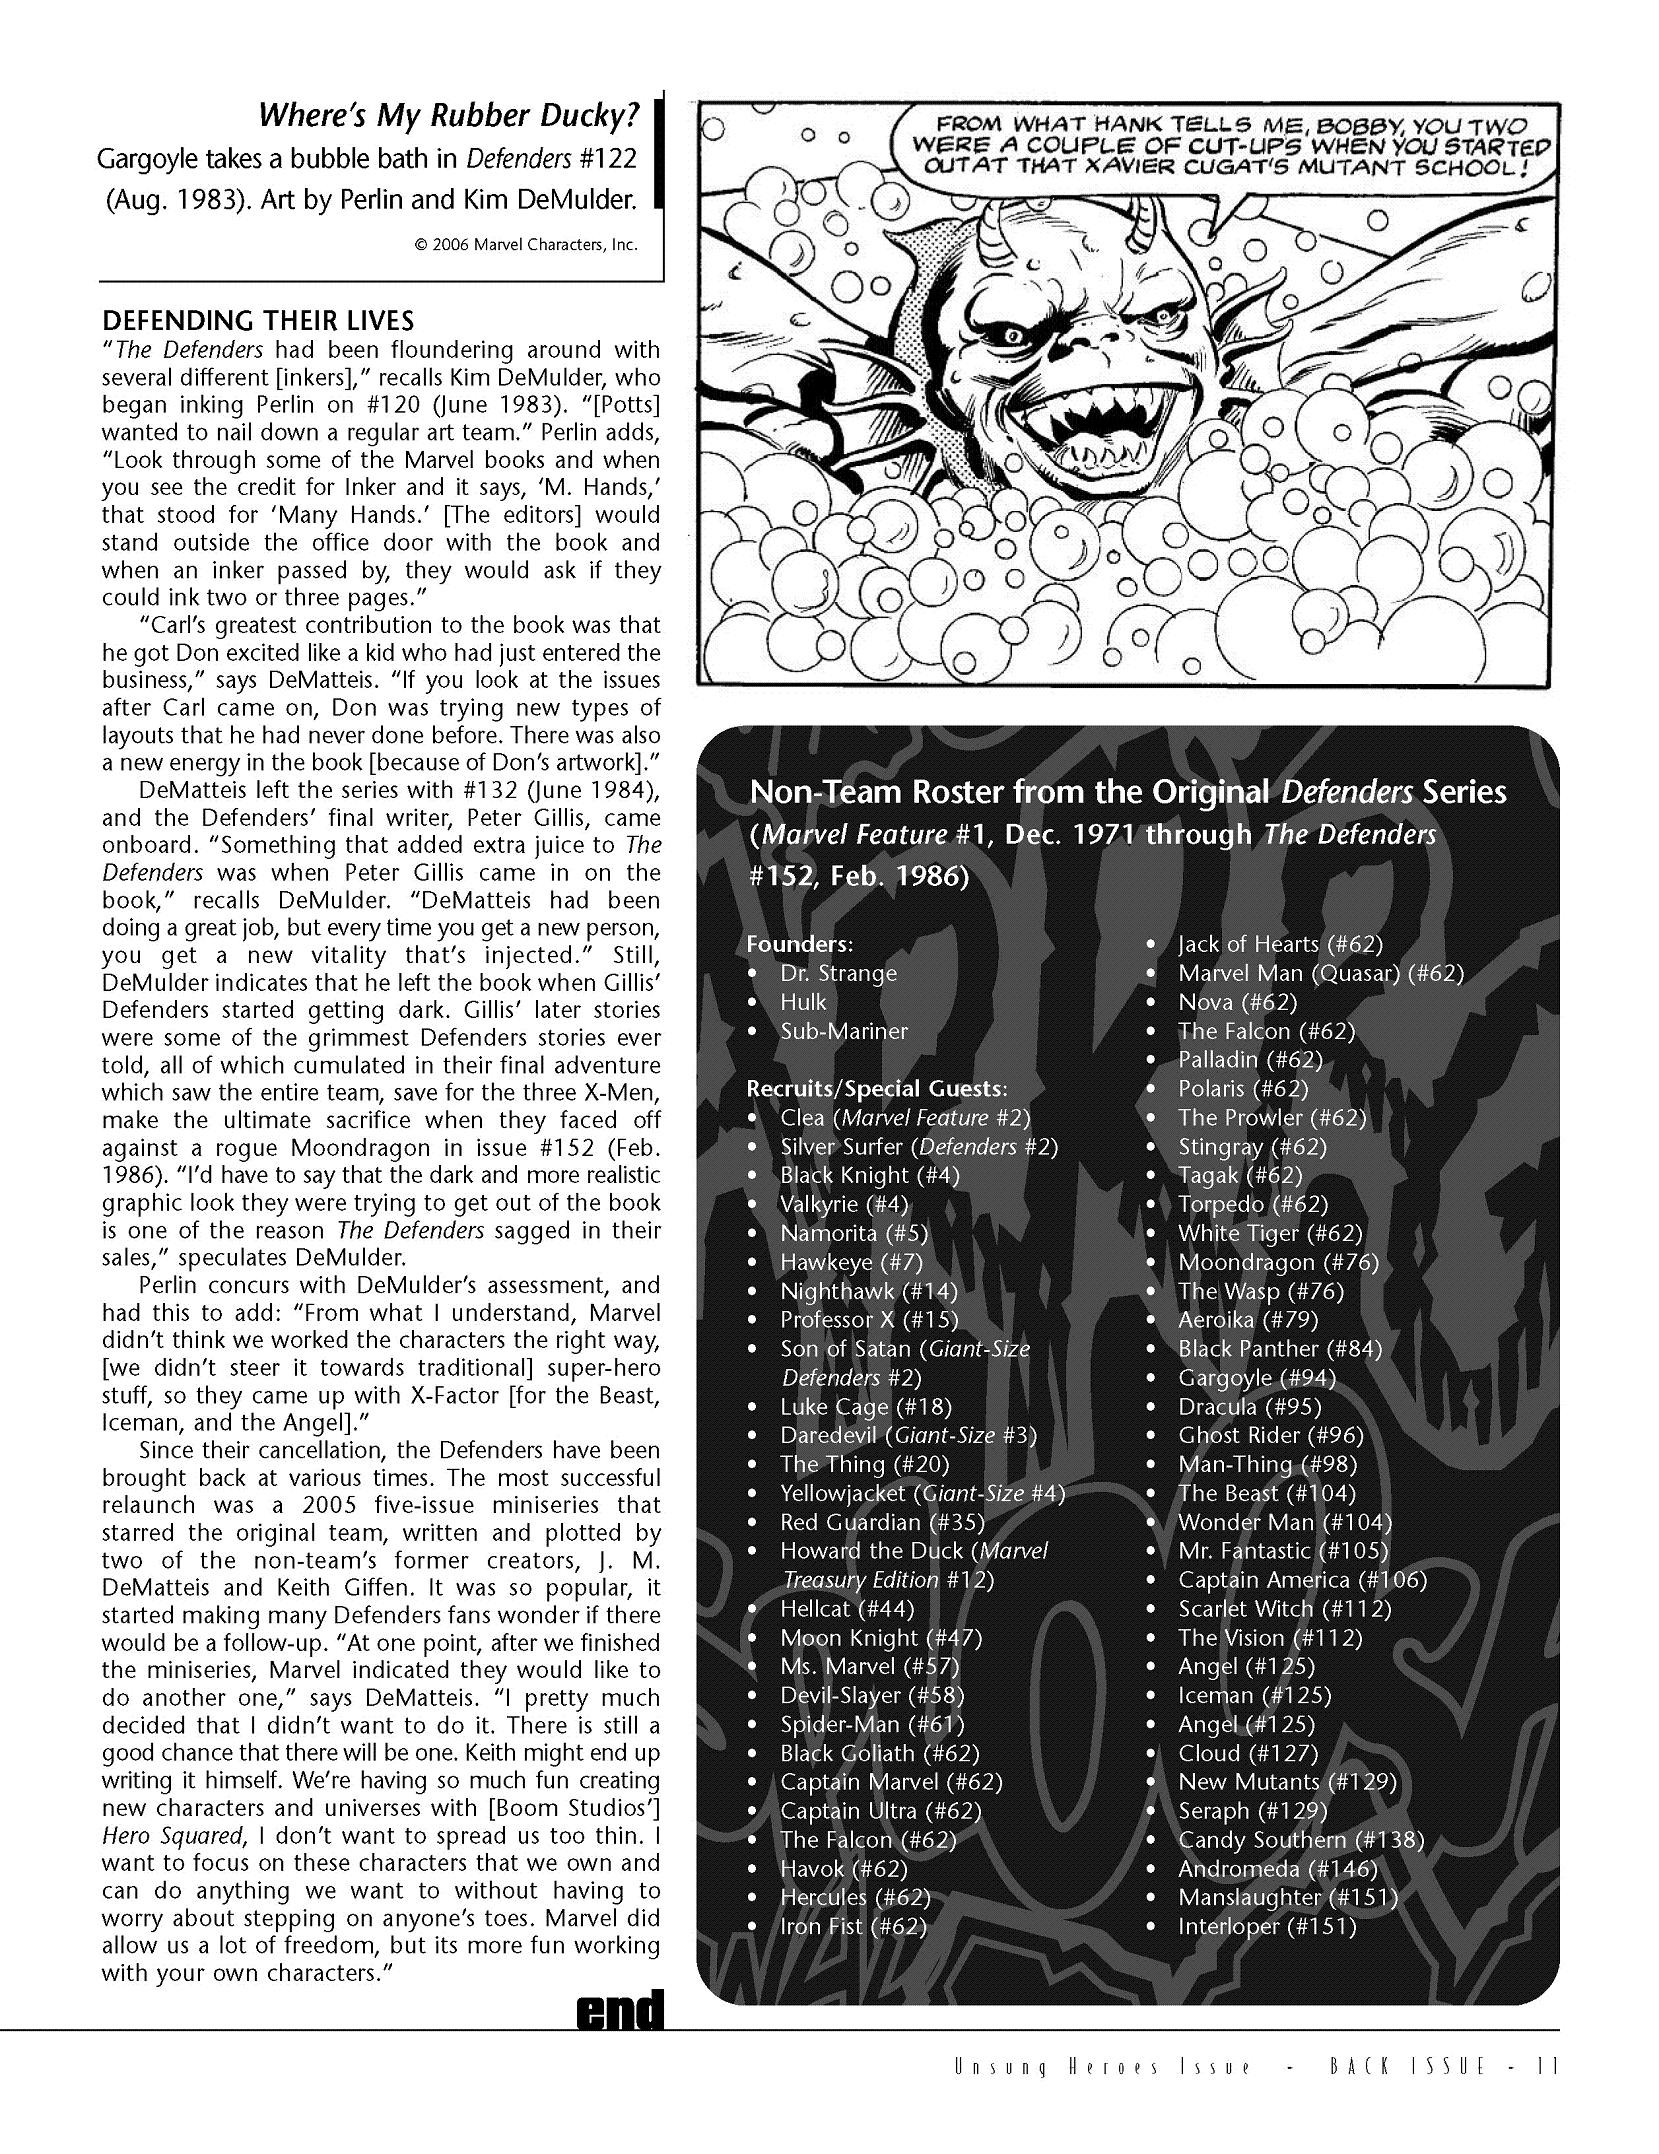 Read online Back Issue comic -  Issue #19 - 12